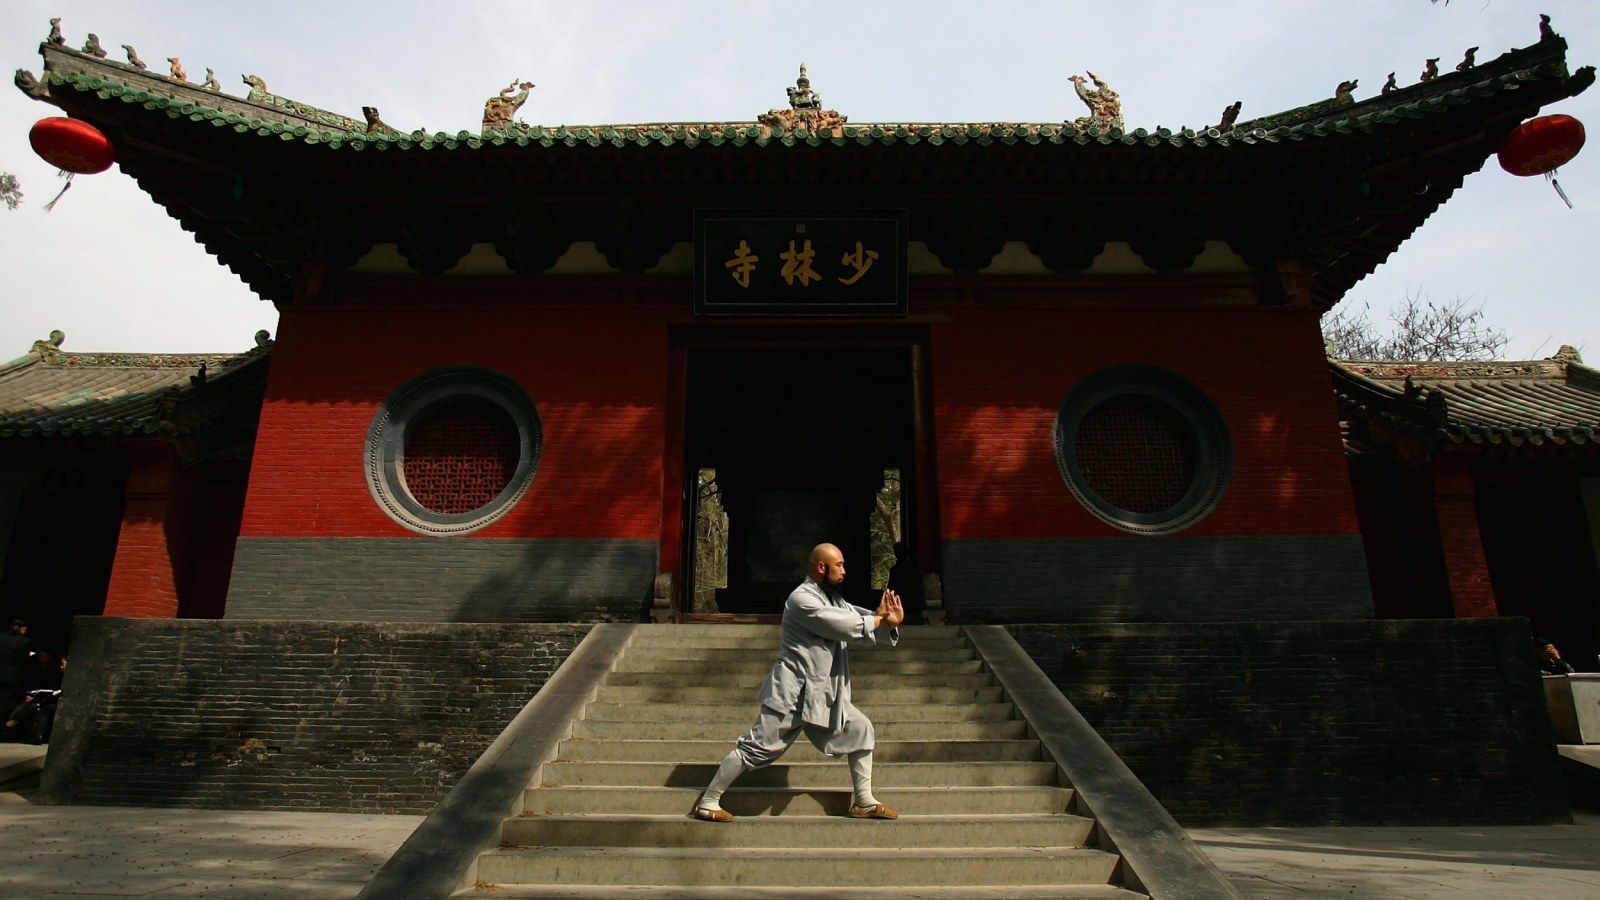 Chinese 'CEO' Monk Has Been Cleared of Embezzlement